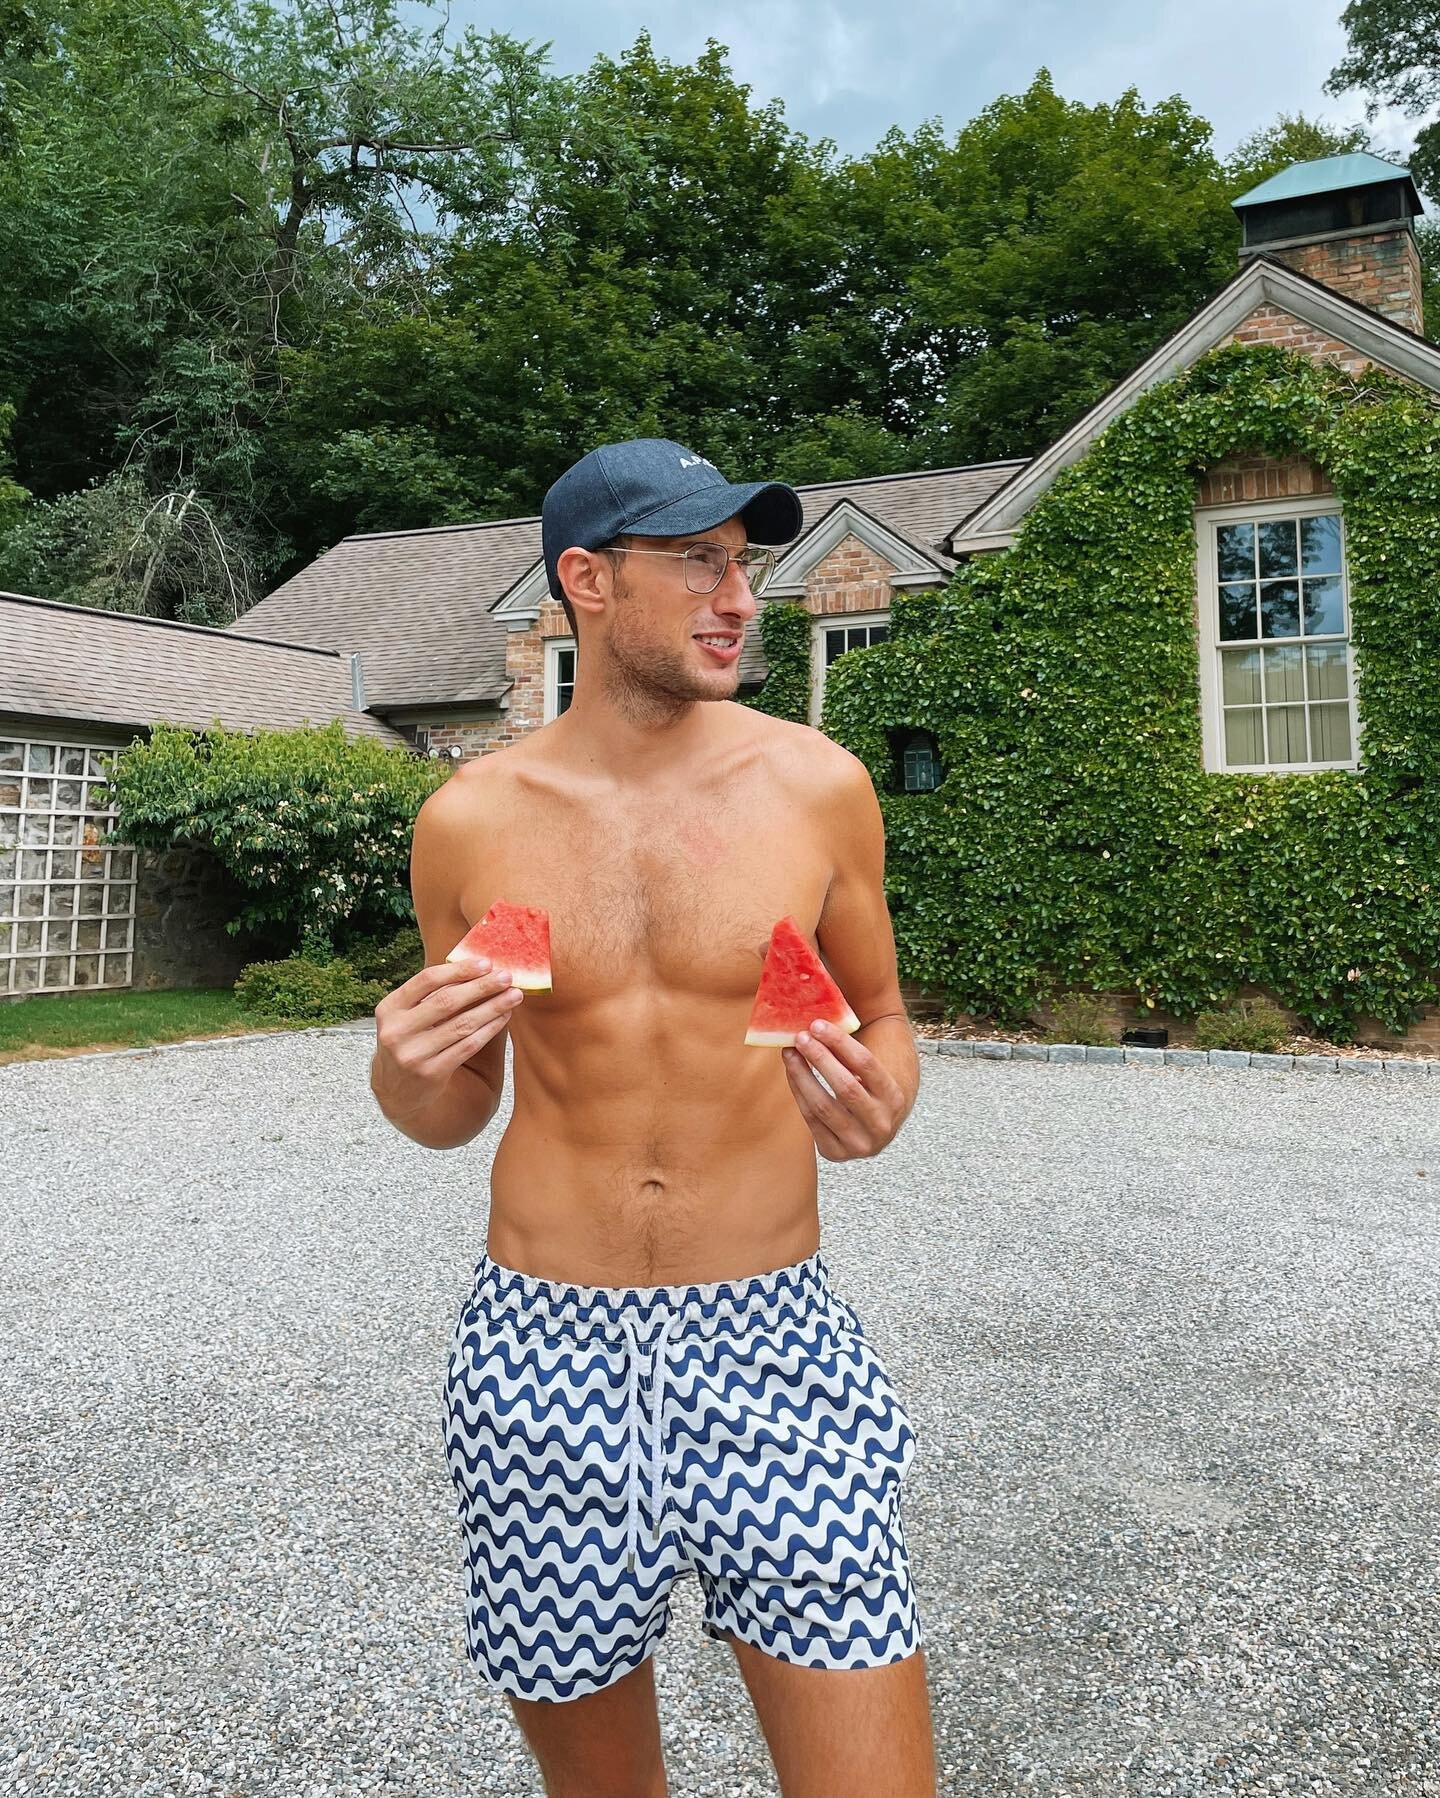 Forgot to wear red yesterday so had to improvise&hellip; 🍉🍉🤷🏻&zwj;♂️